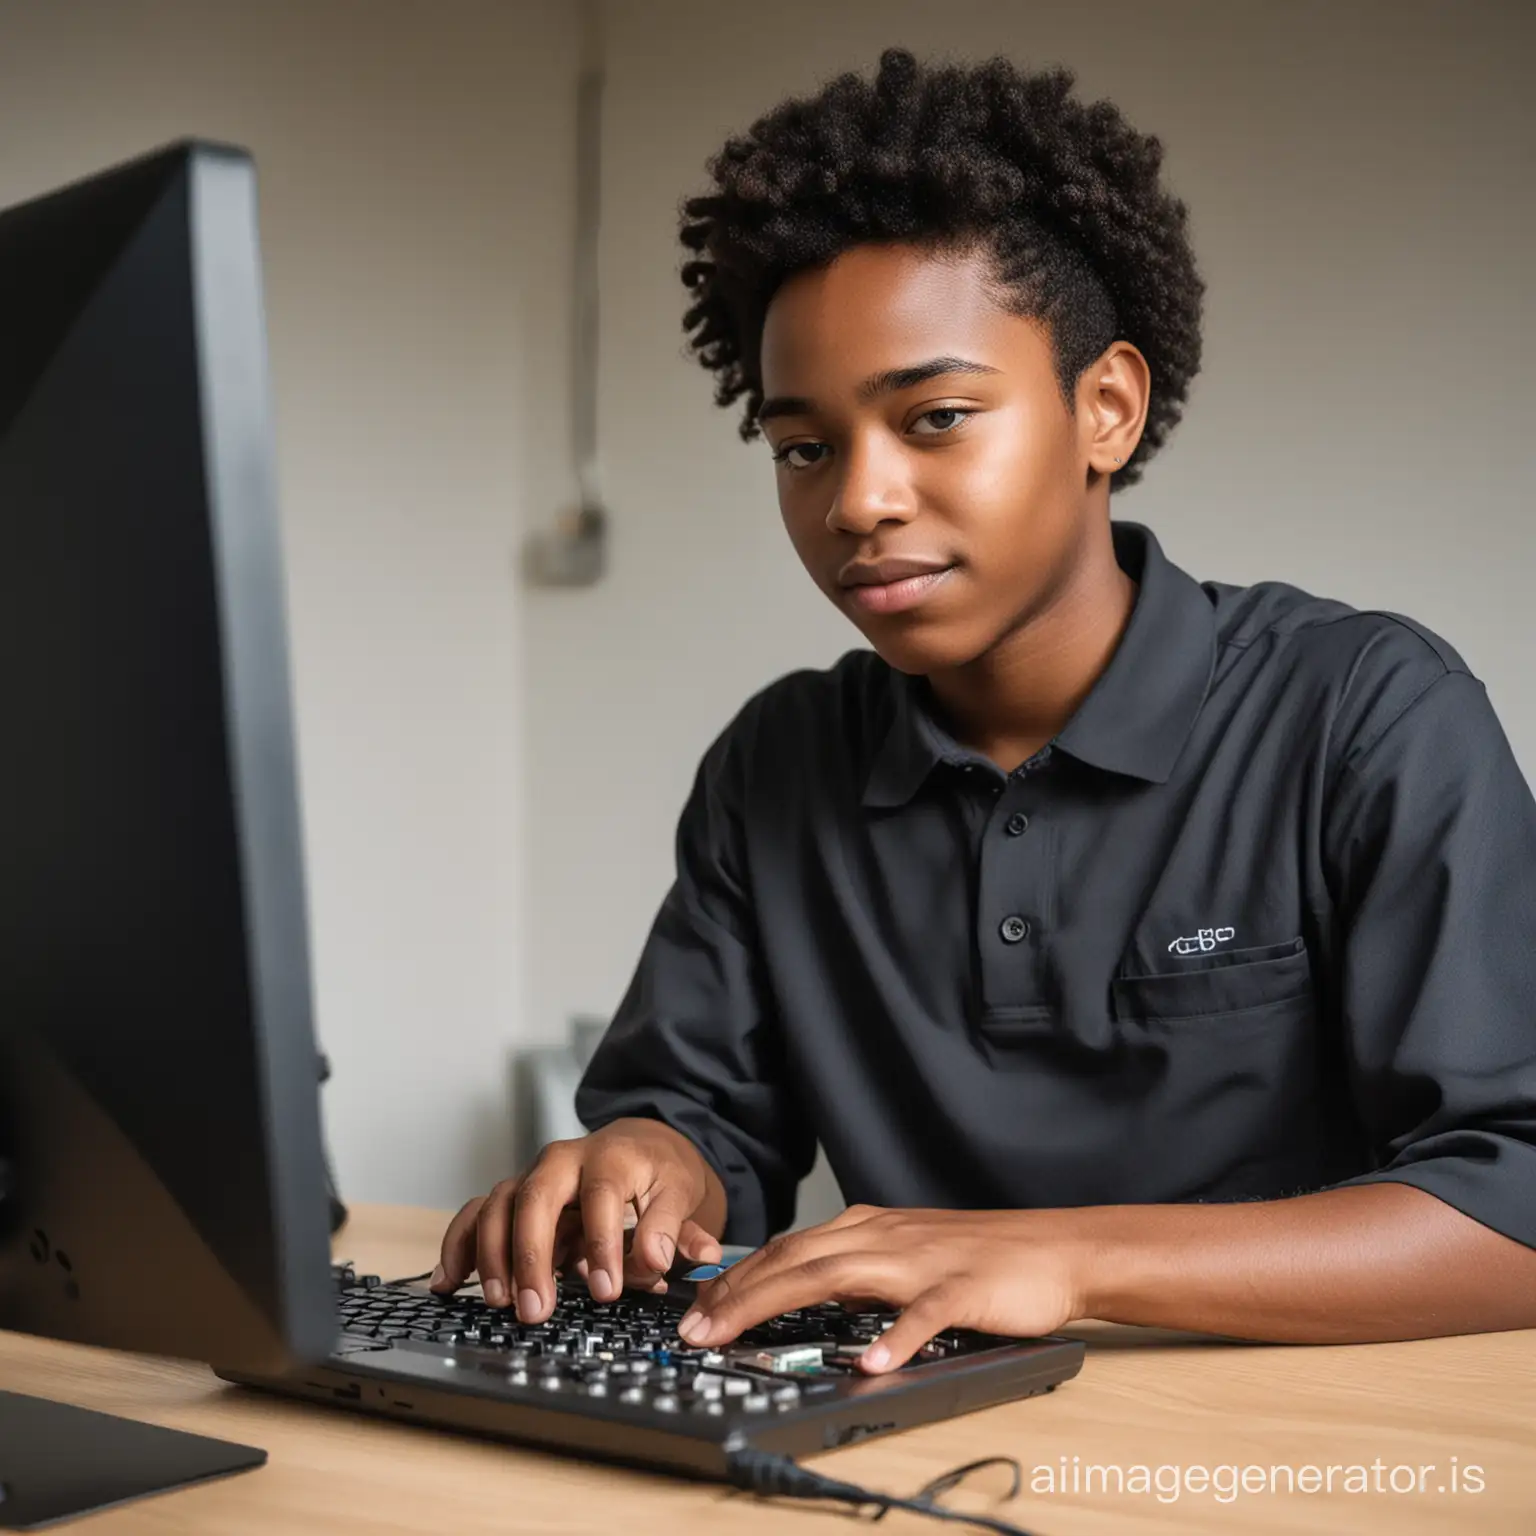 Young-Black-Person-Engaged-in-Technology-Work